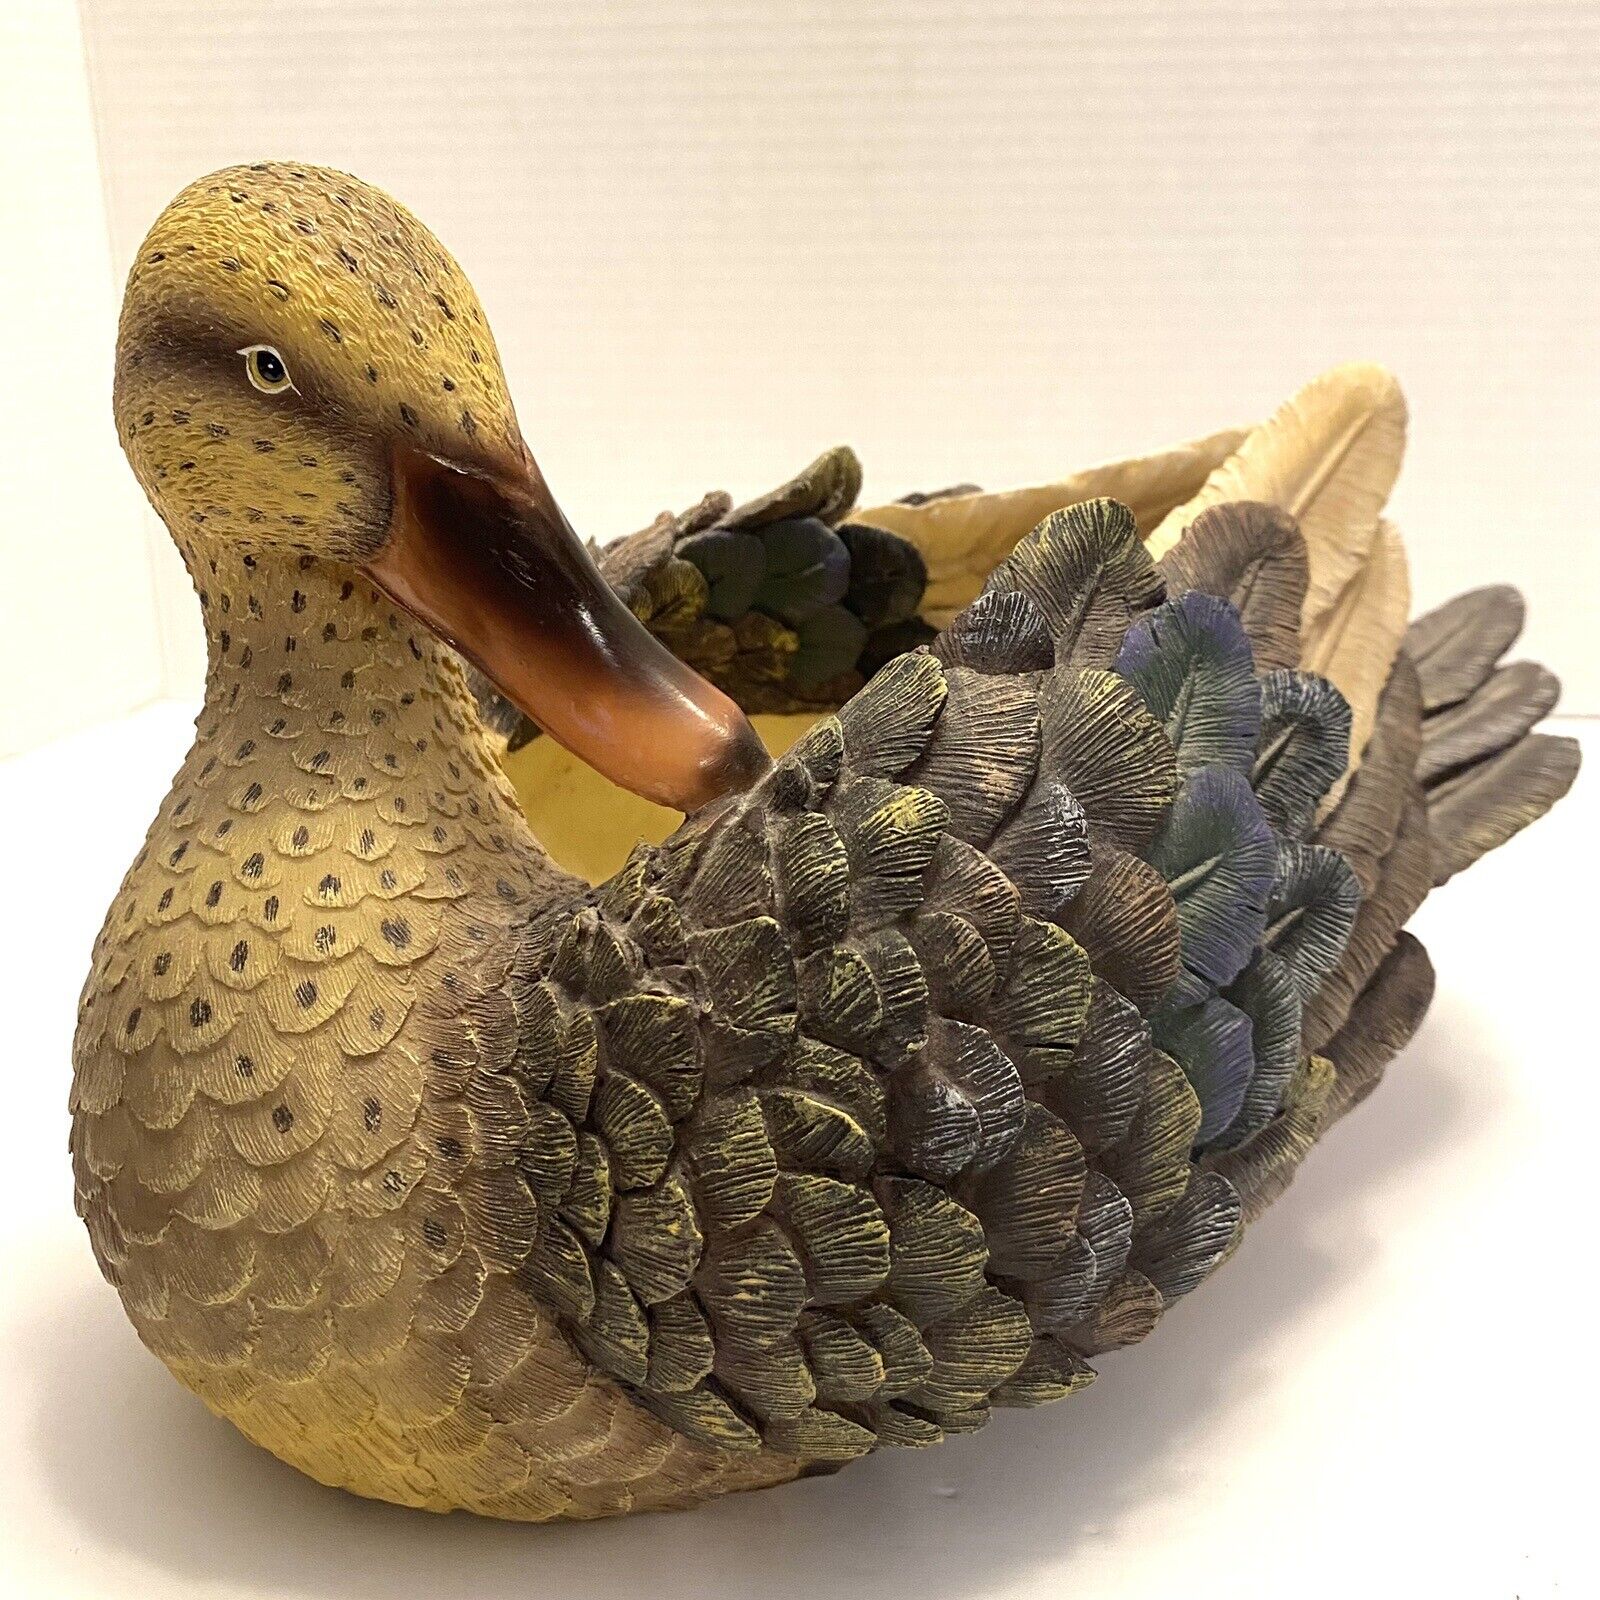 Bird DuckPlanter Brow Trinket Candy Planter Dish With Lots Of Carved Details